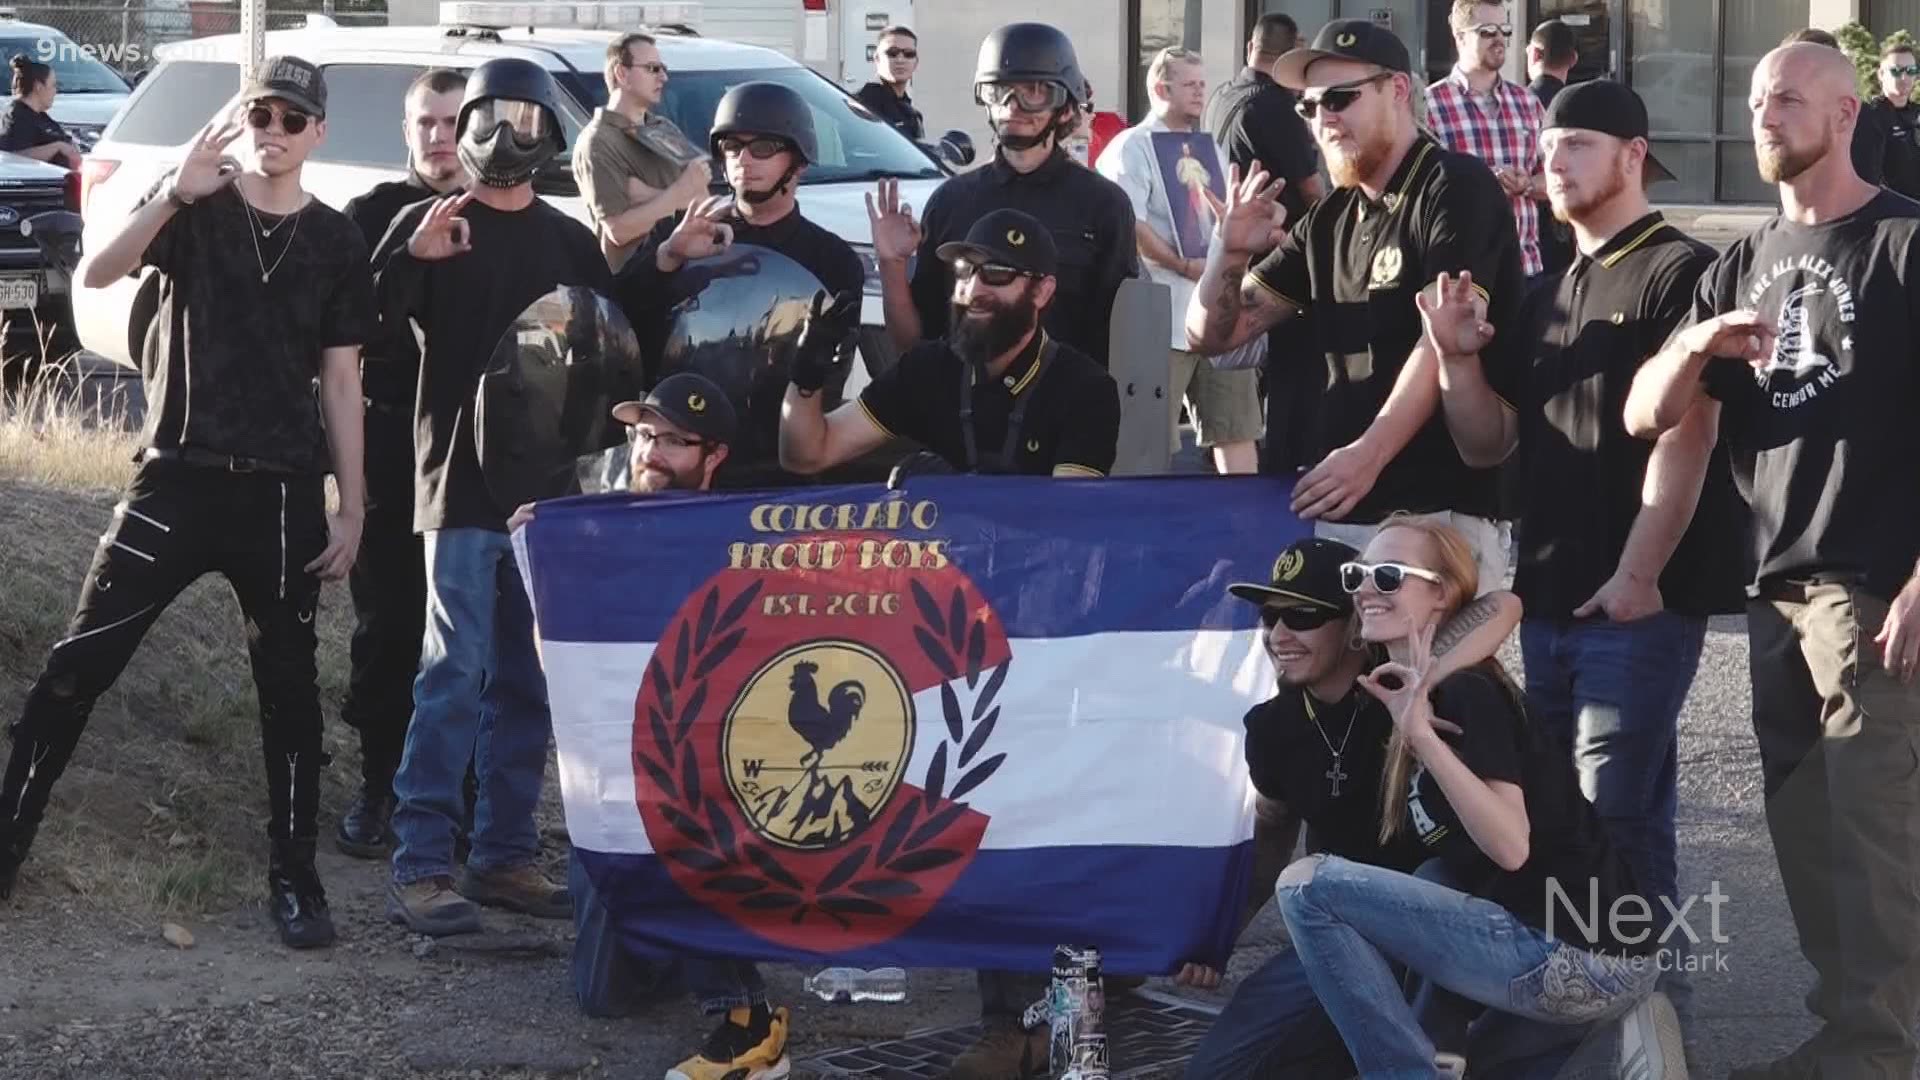 From Colorado Proud Boys to online white supremacy personalities, some Hispanics and Latinos are using their ethnicity to try and cloak bigoted behavior, experts say